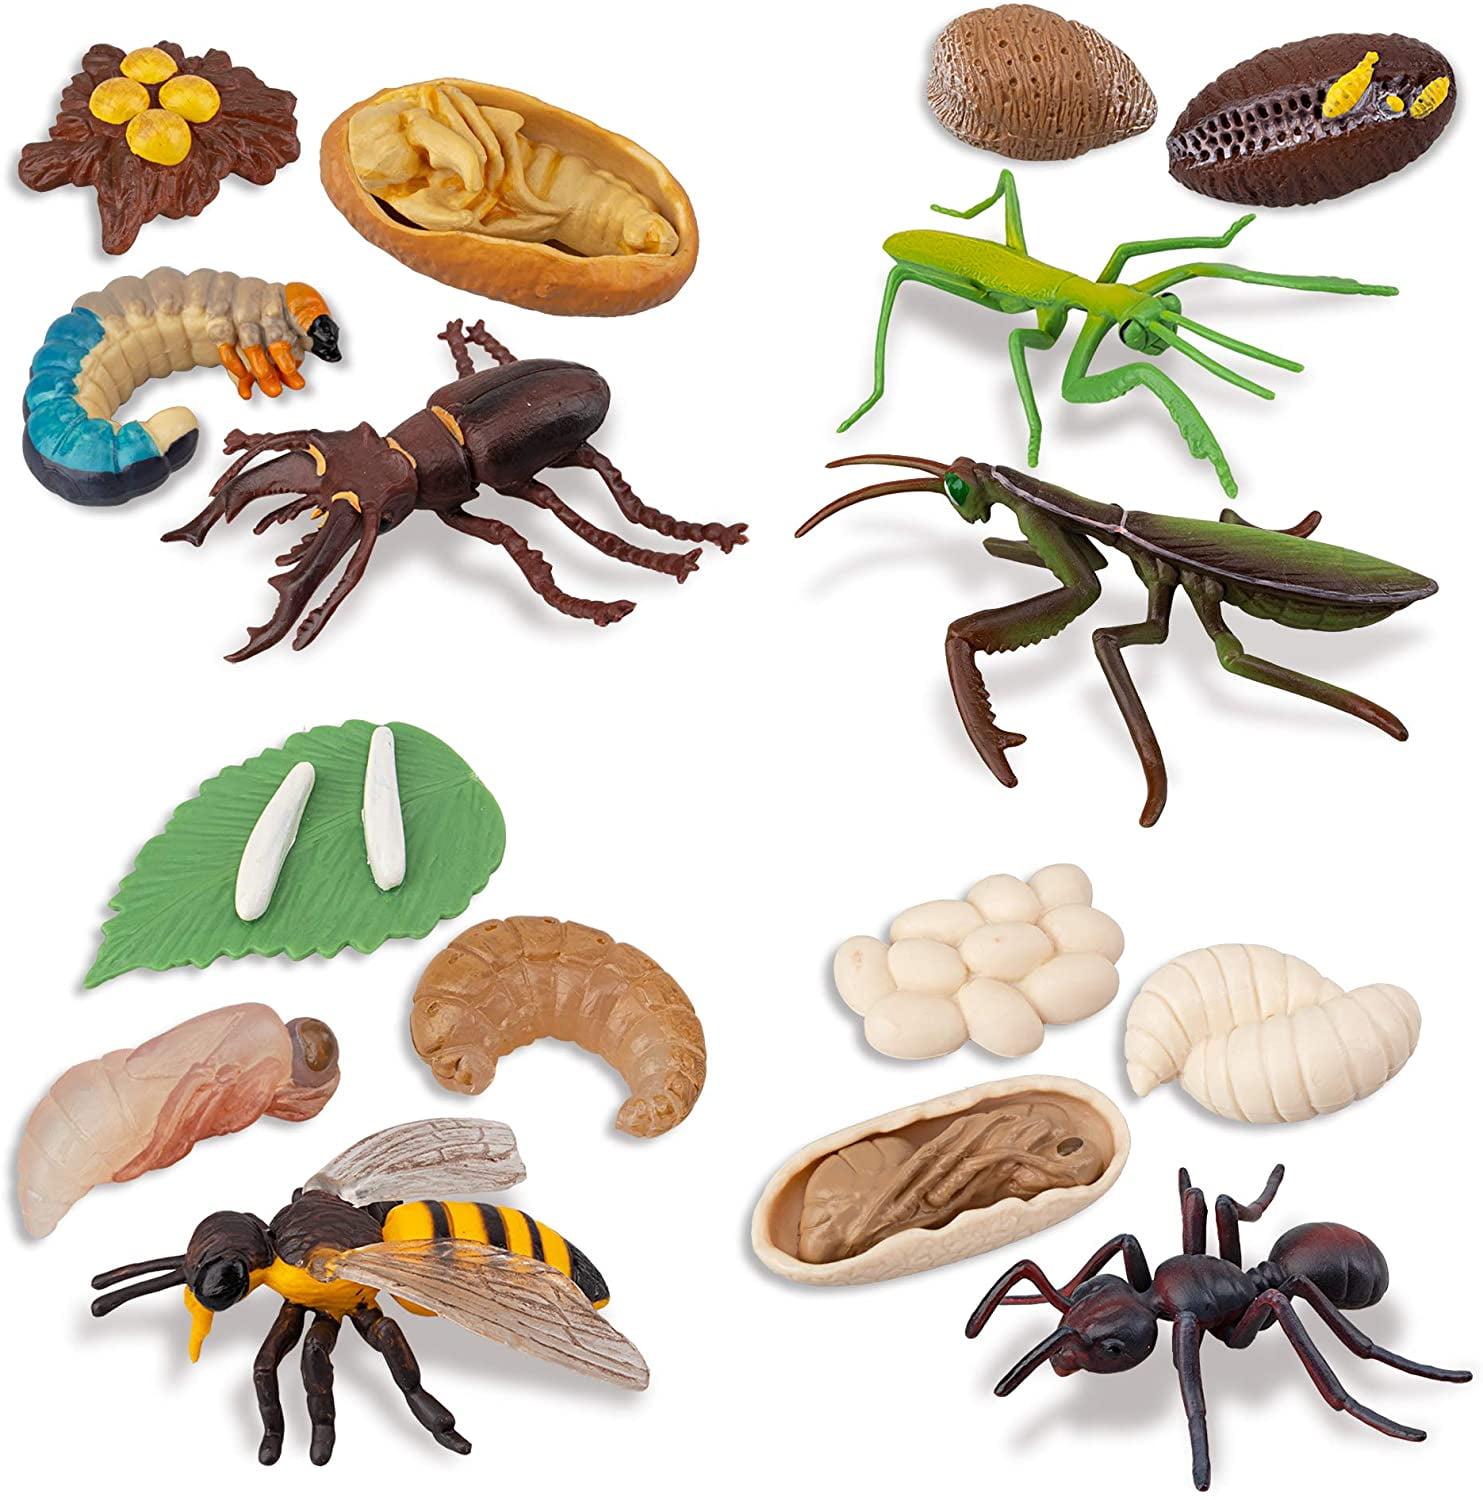 16PCS Insect Figurines Life Cycle of Stag Beetle,Honey Bee,Mantis,Ant  Plastic Safariology Bug Figures Toy Kit Caterpillars to Butterflies  Educational School Project for Kids Toddlers 